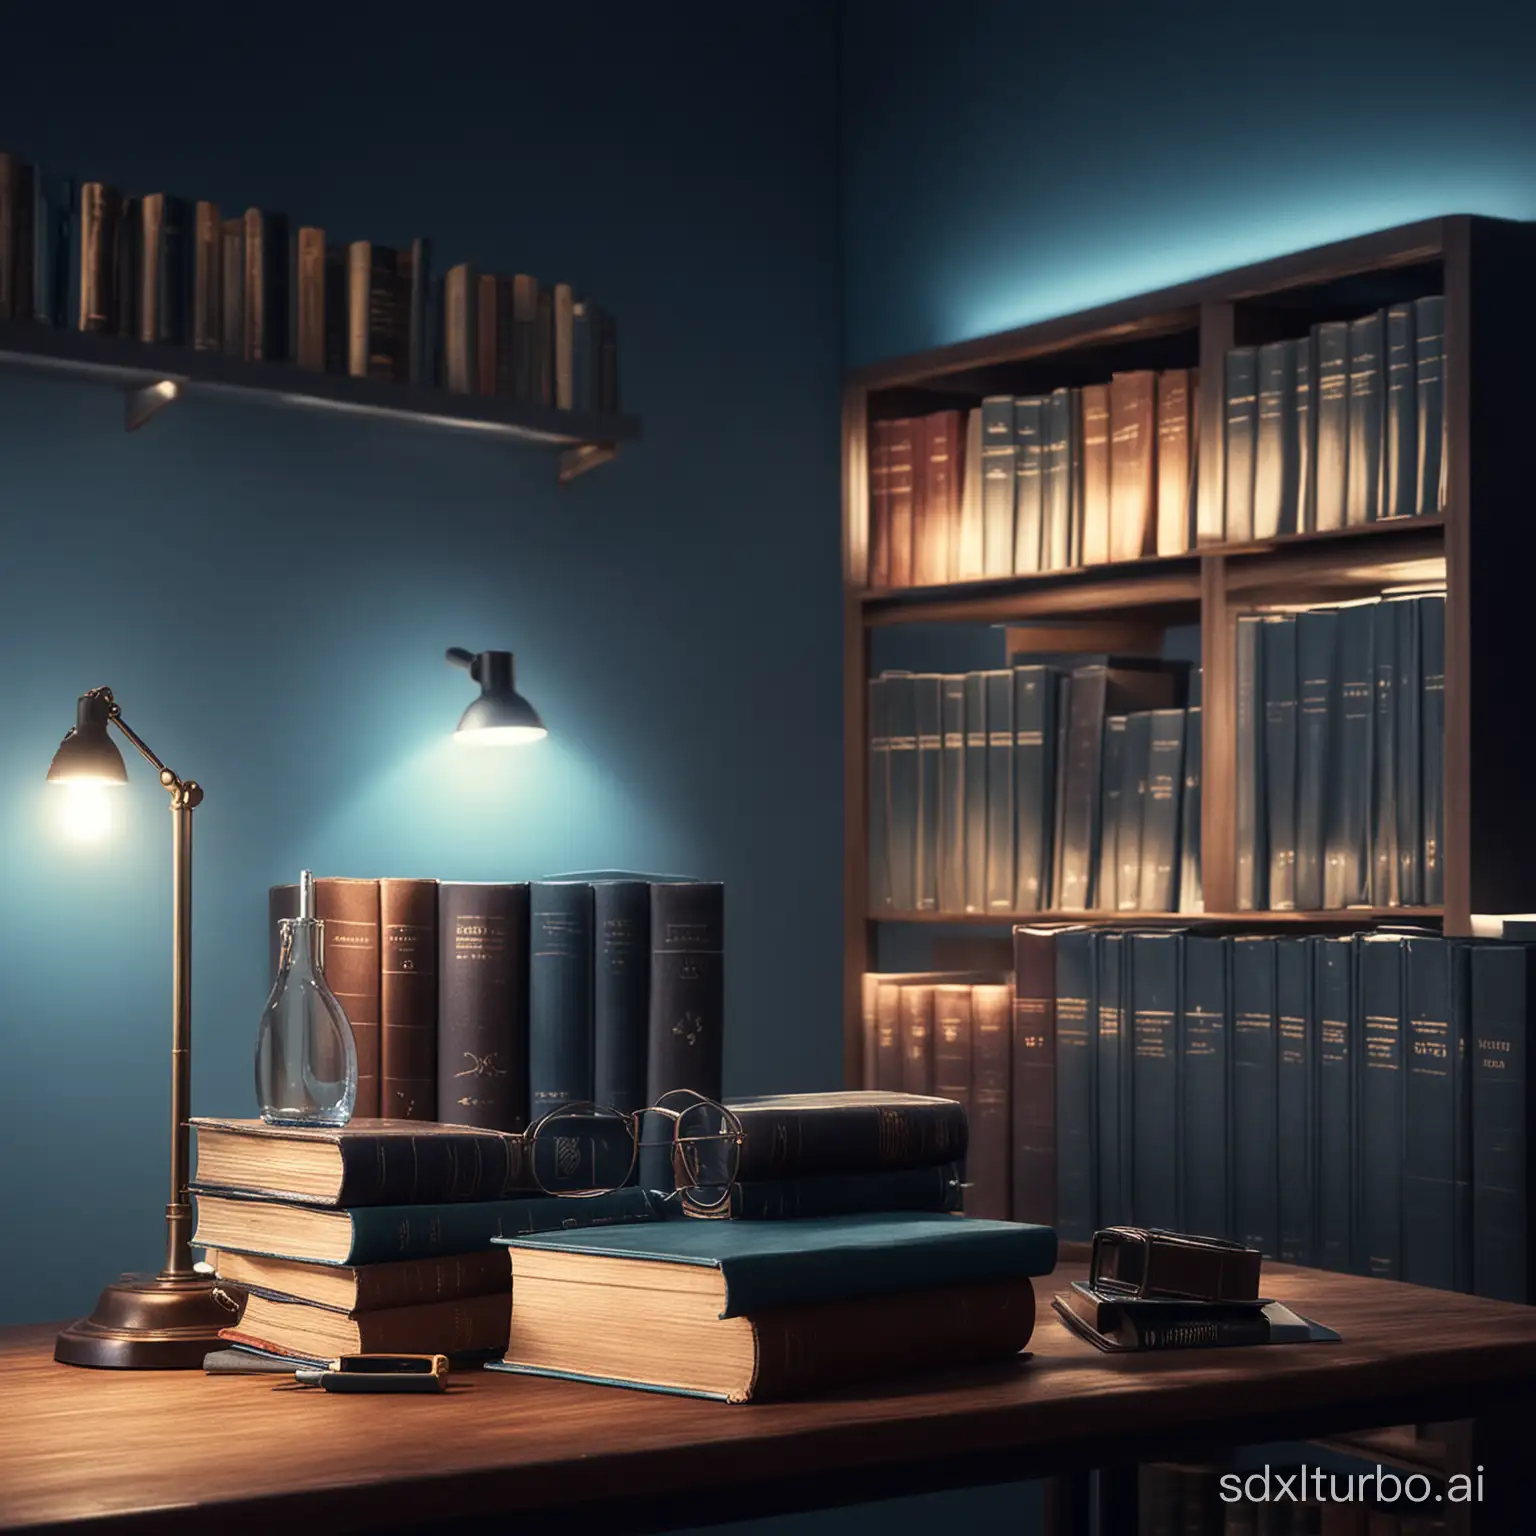 Professional-Workspace-with-Elegant-Blue-Lighting-and-Books